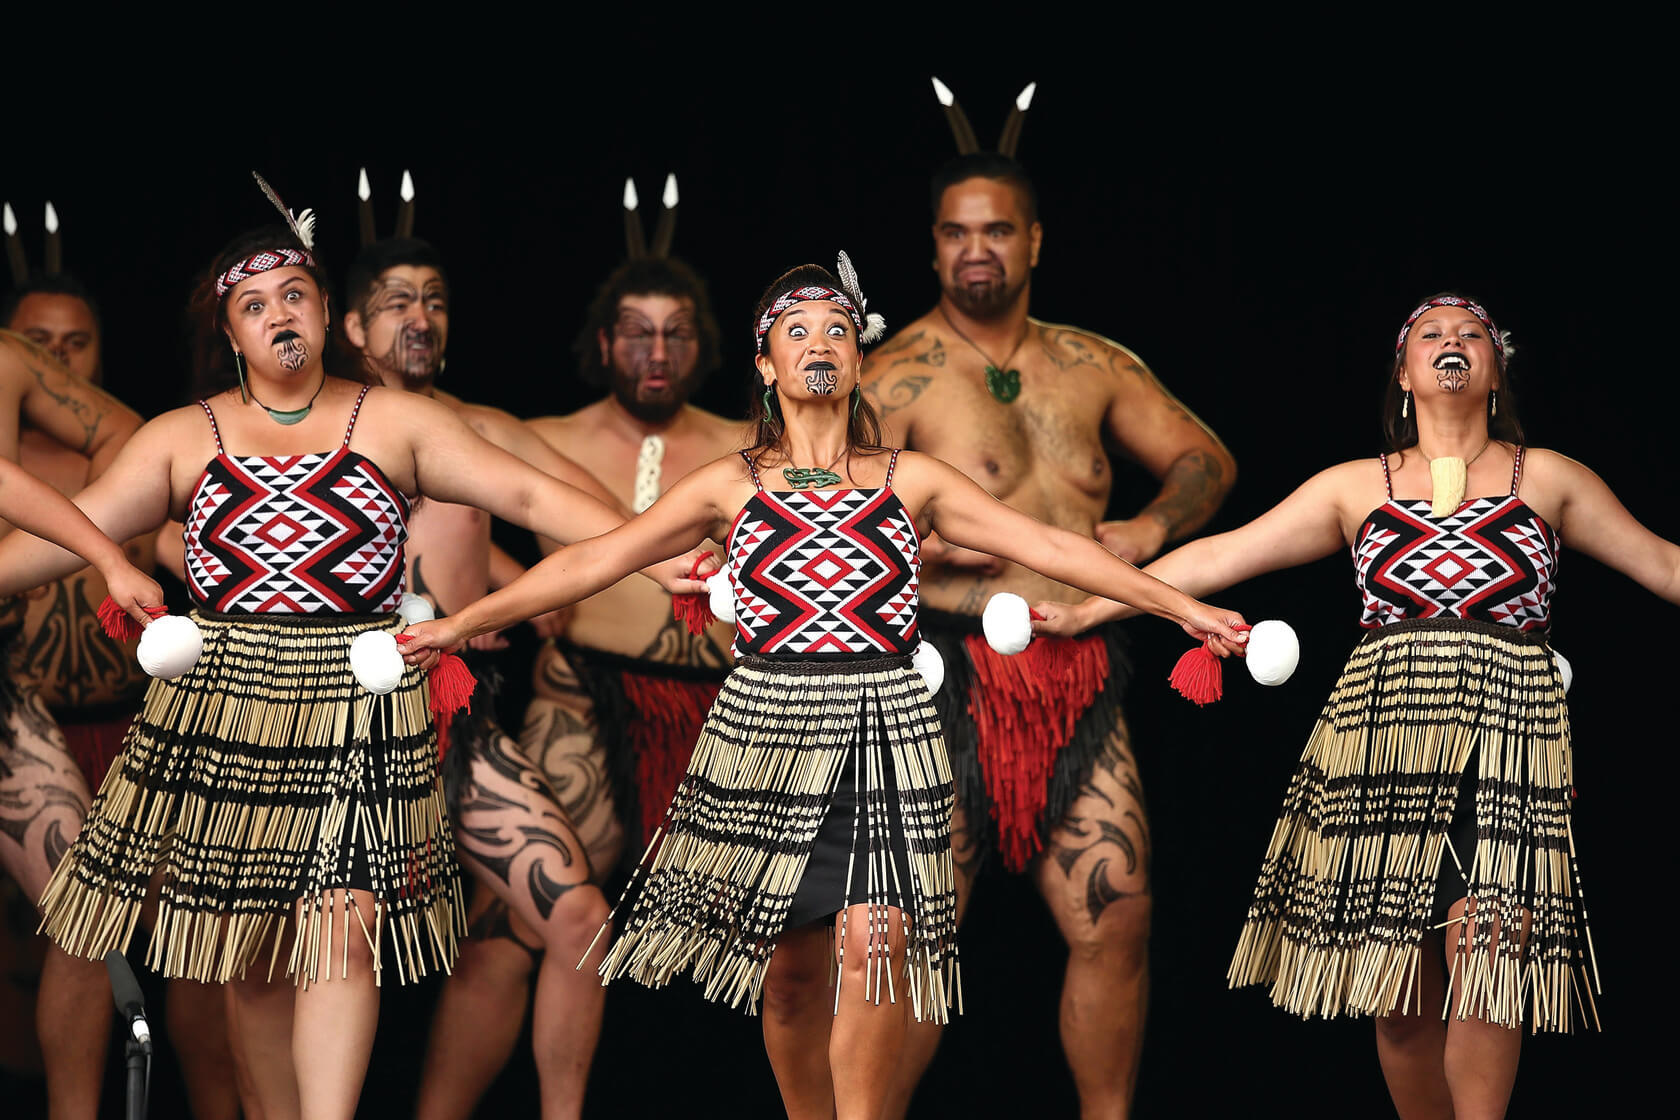 Three women stand in front of a group performing the haka dance